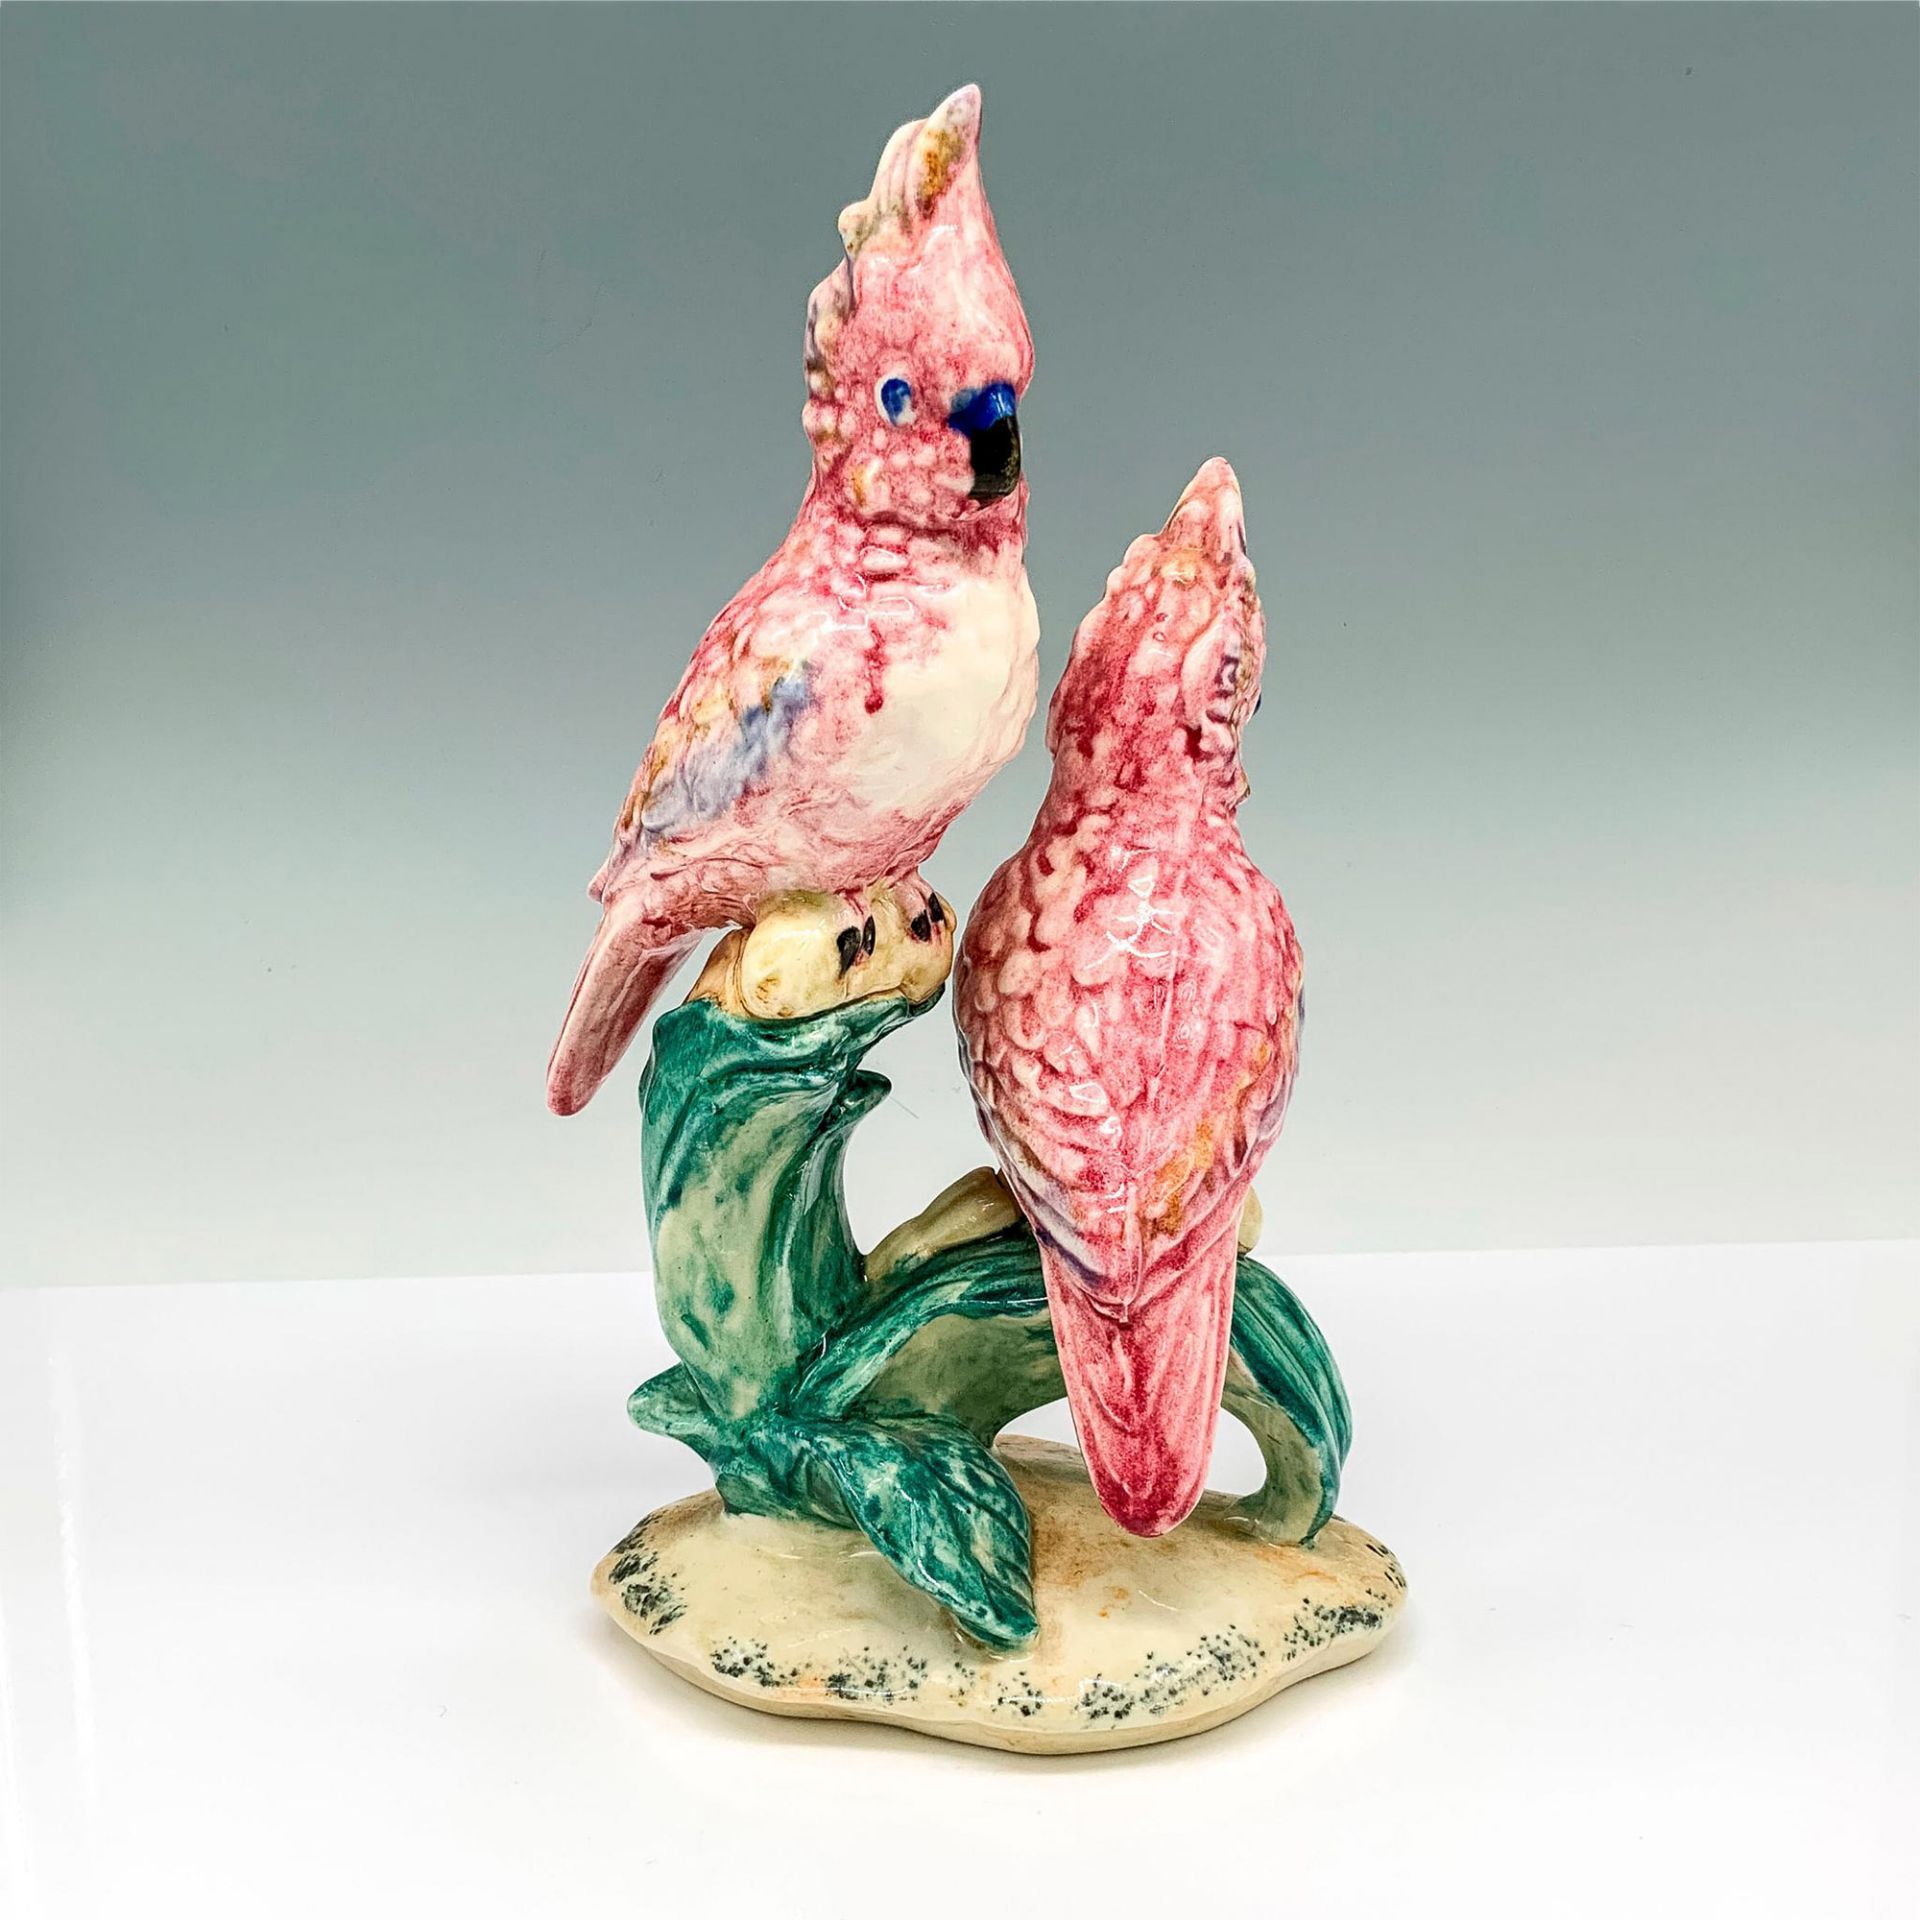 Stangl Pottery Bird Figurine, Double Cockatoos 3405D - Image 3 of 5